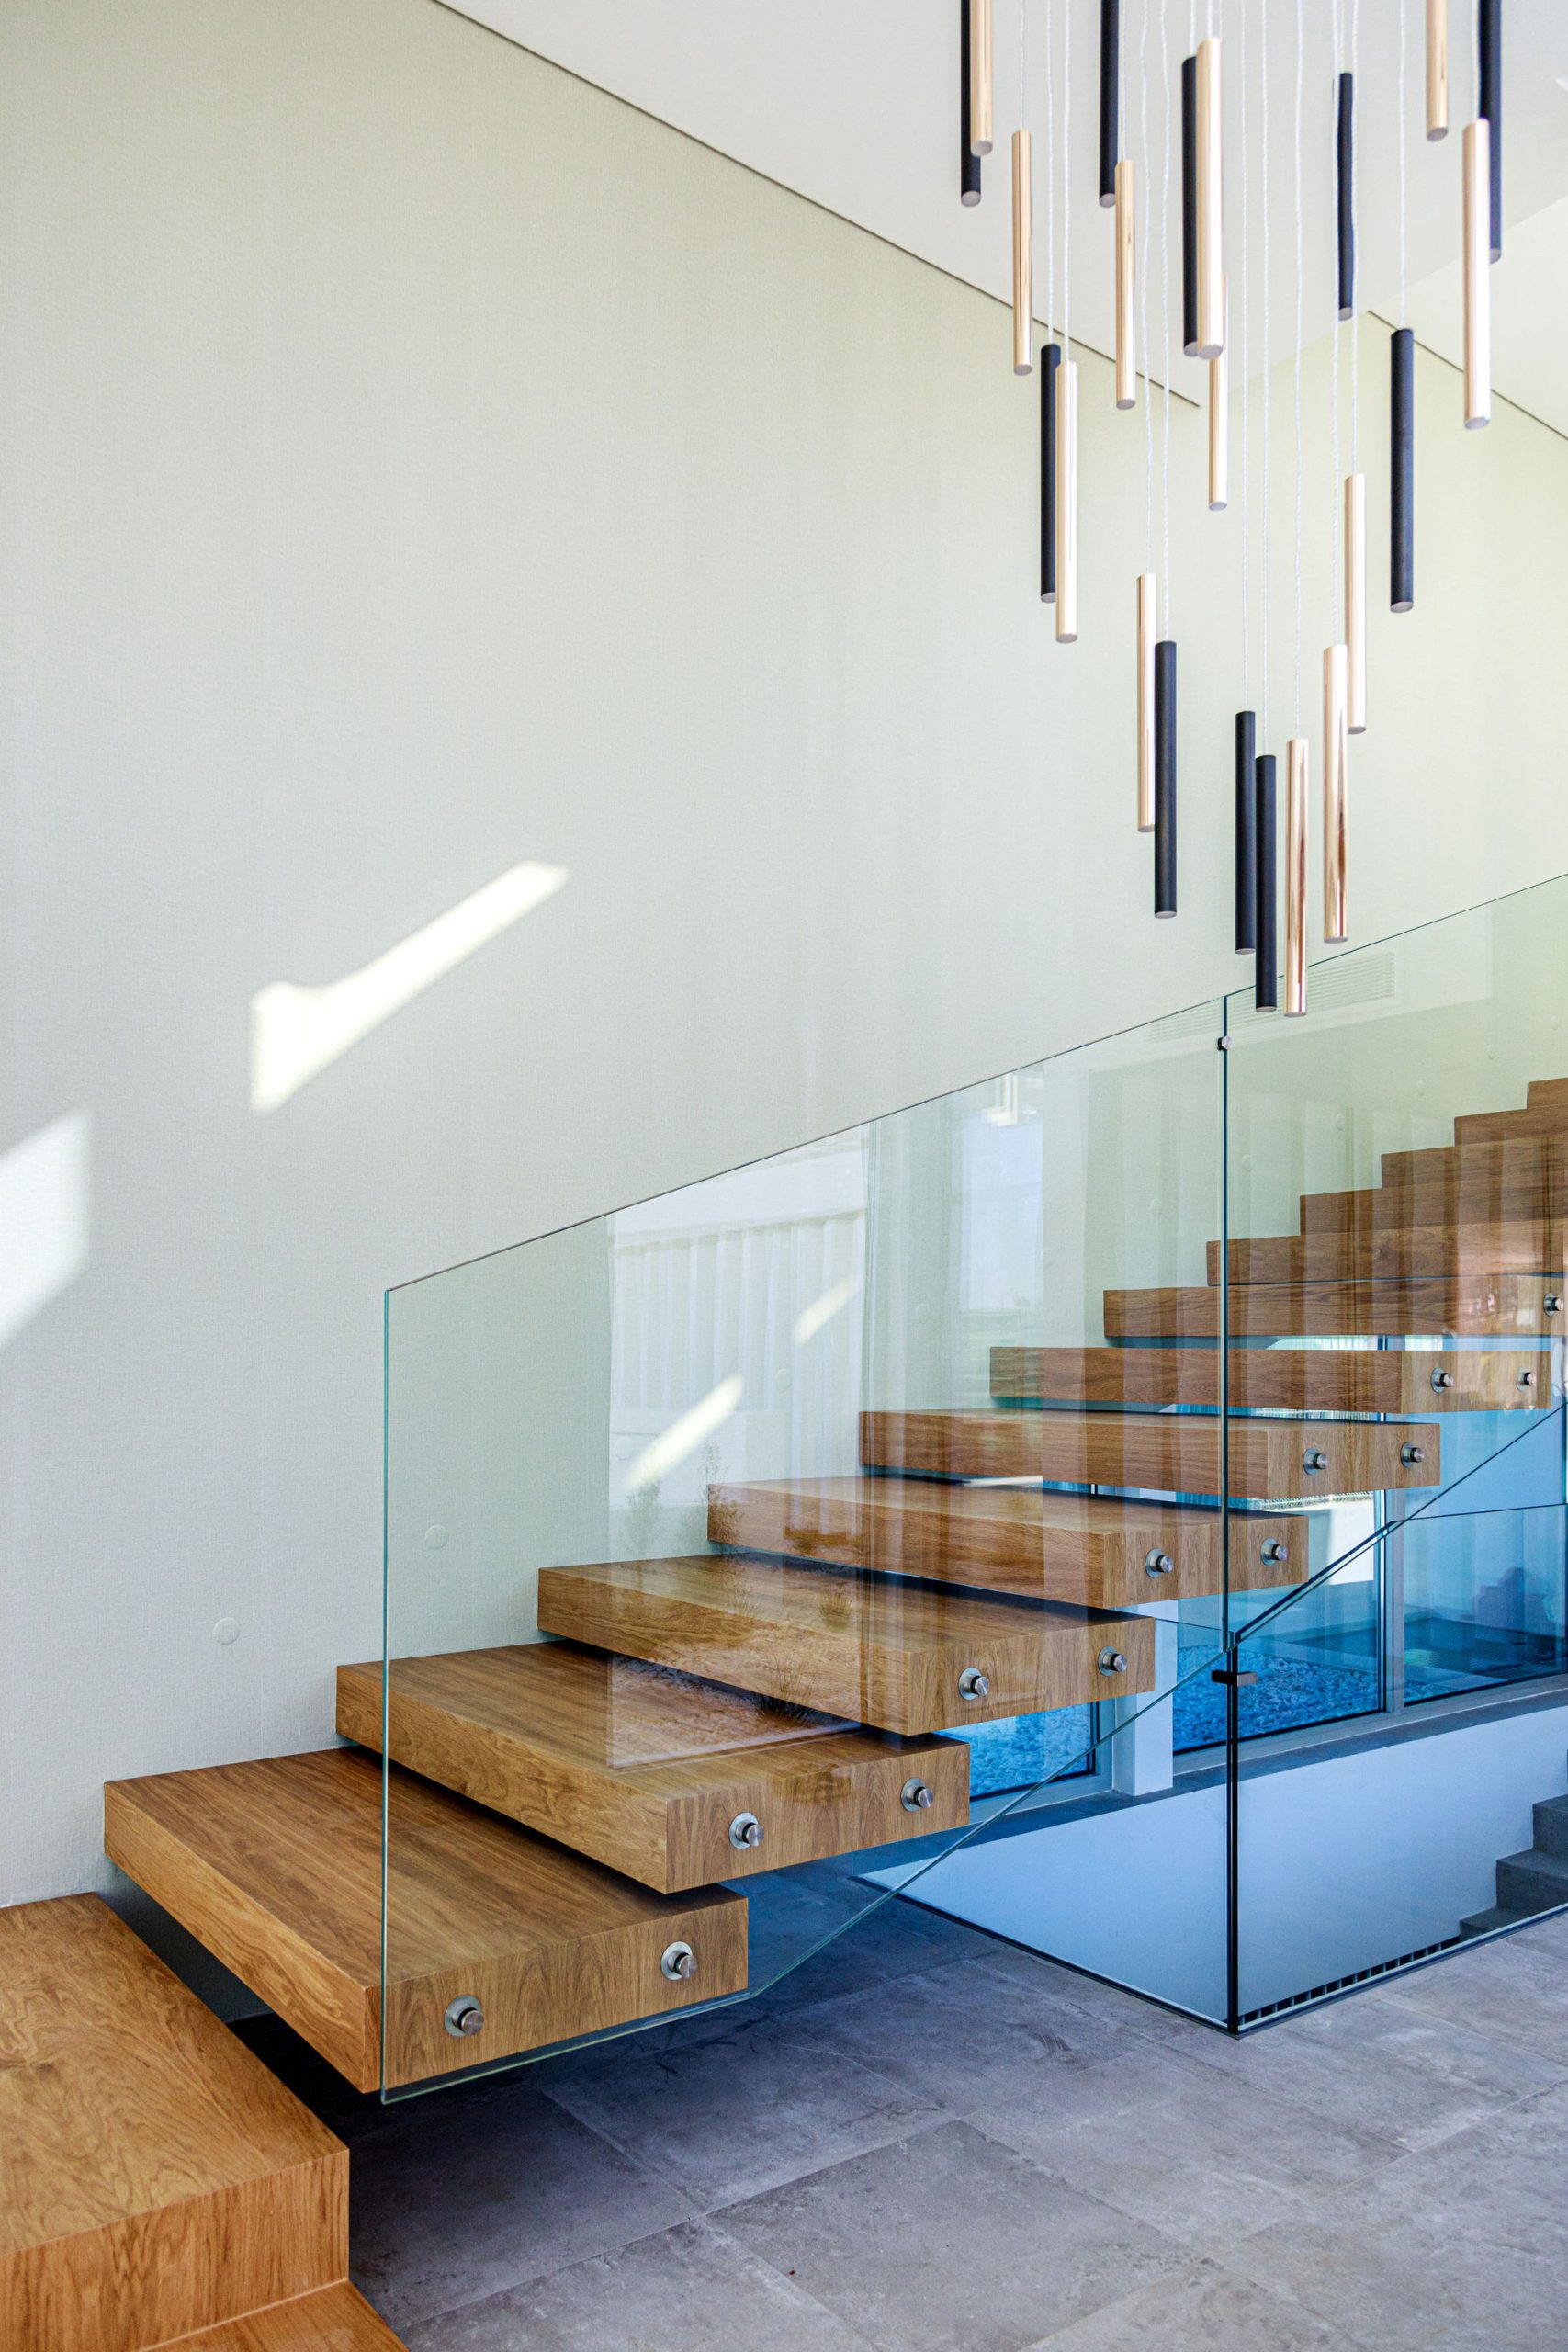 Glass stair case detail against wall-mounted floating wooden stairs